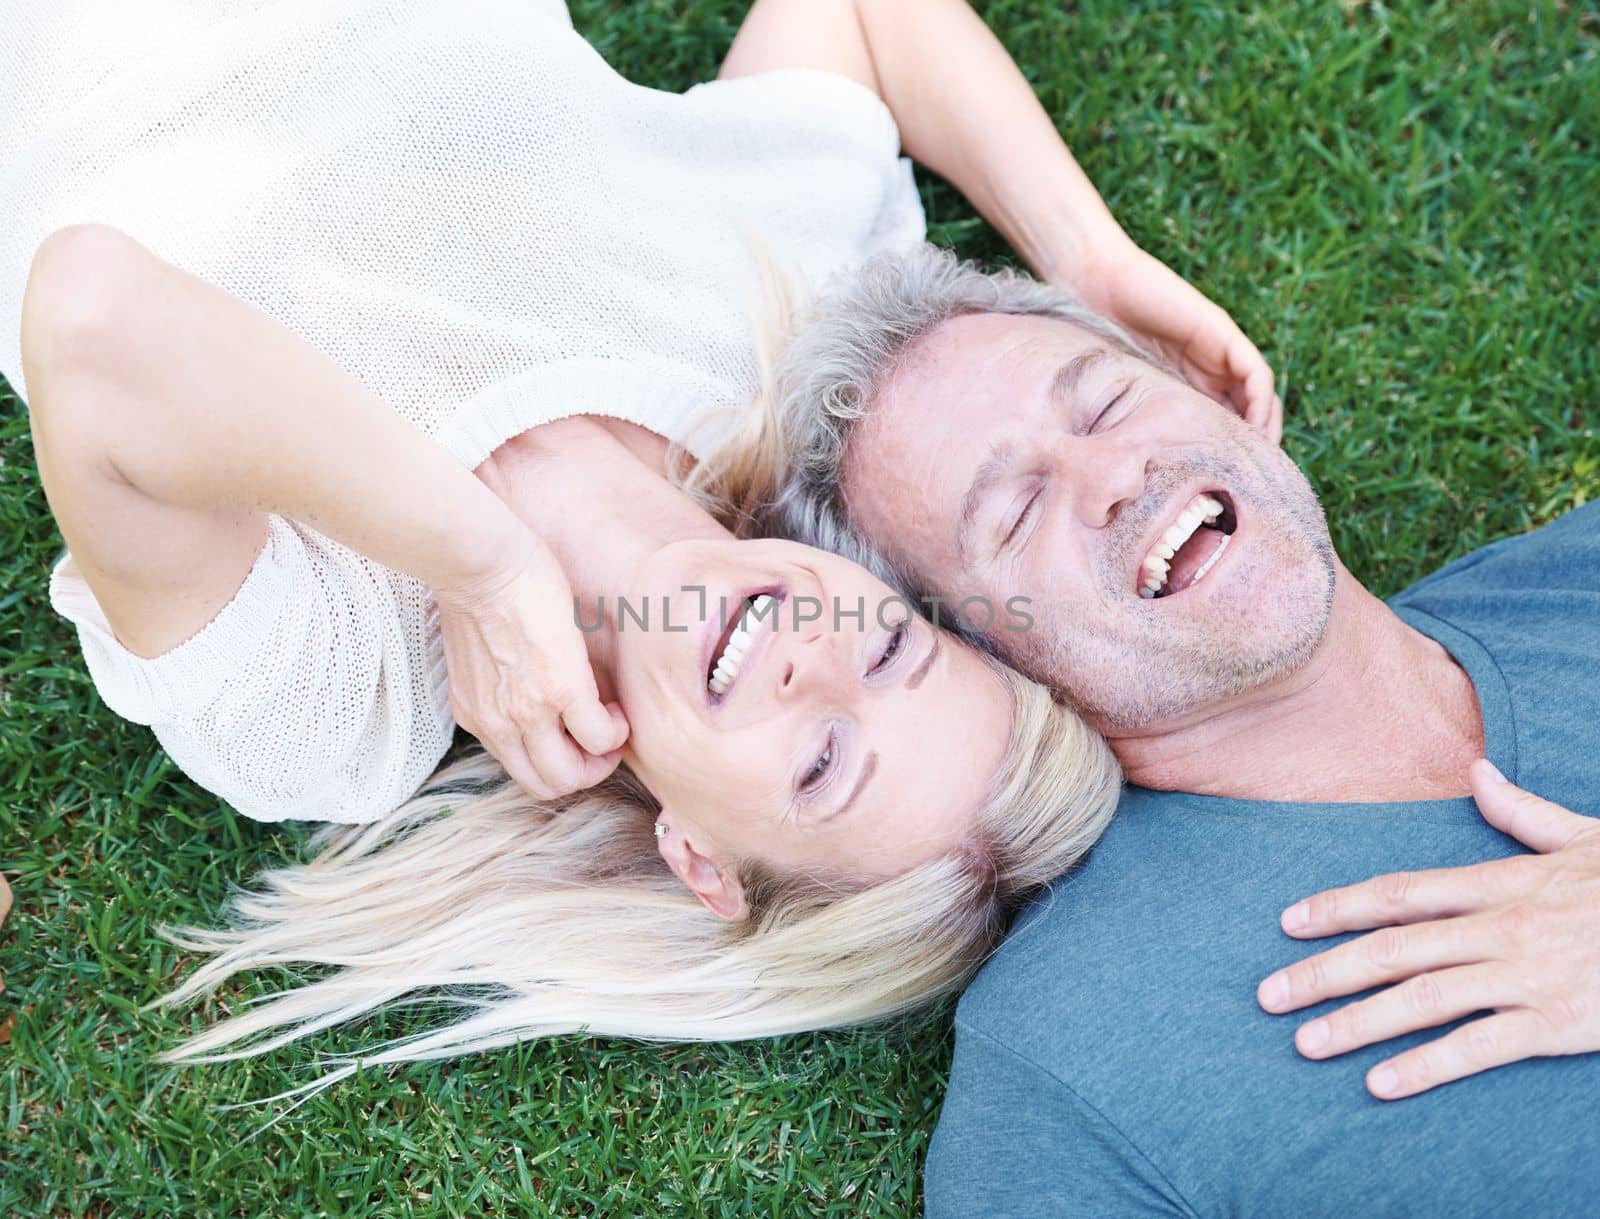 Laughter on the cool grass. A mature couple lying on the grass smiling with eyes closed